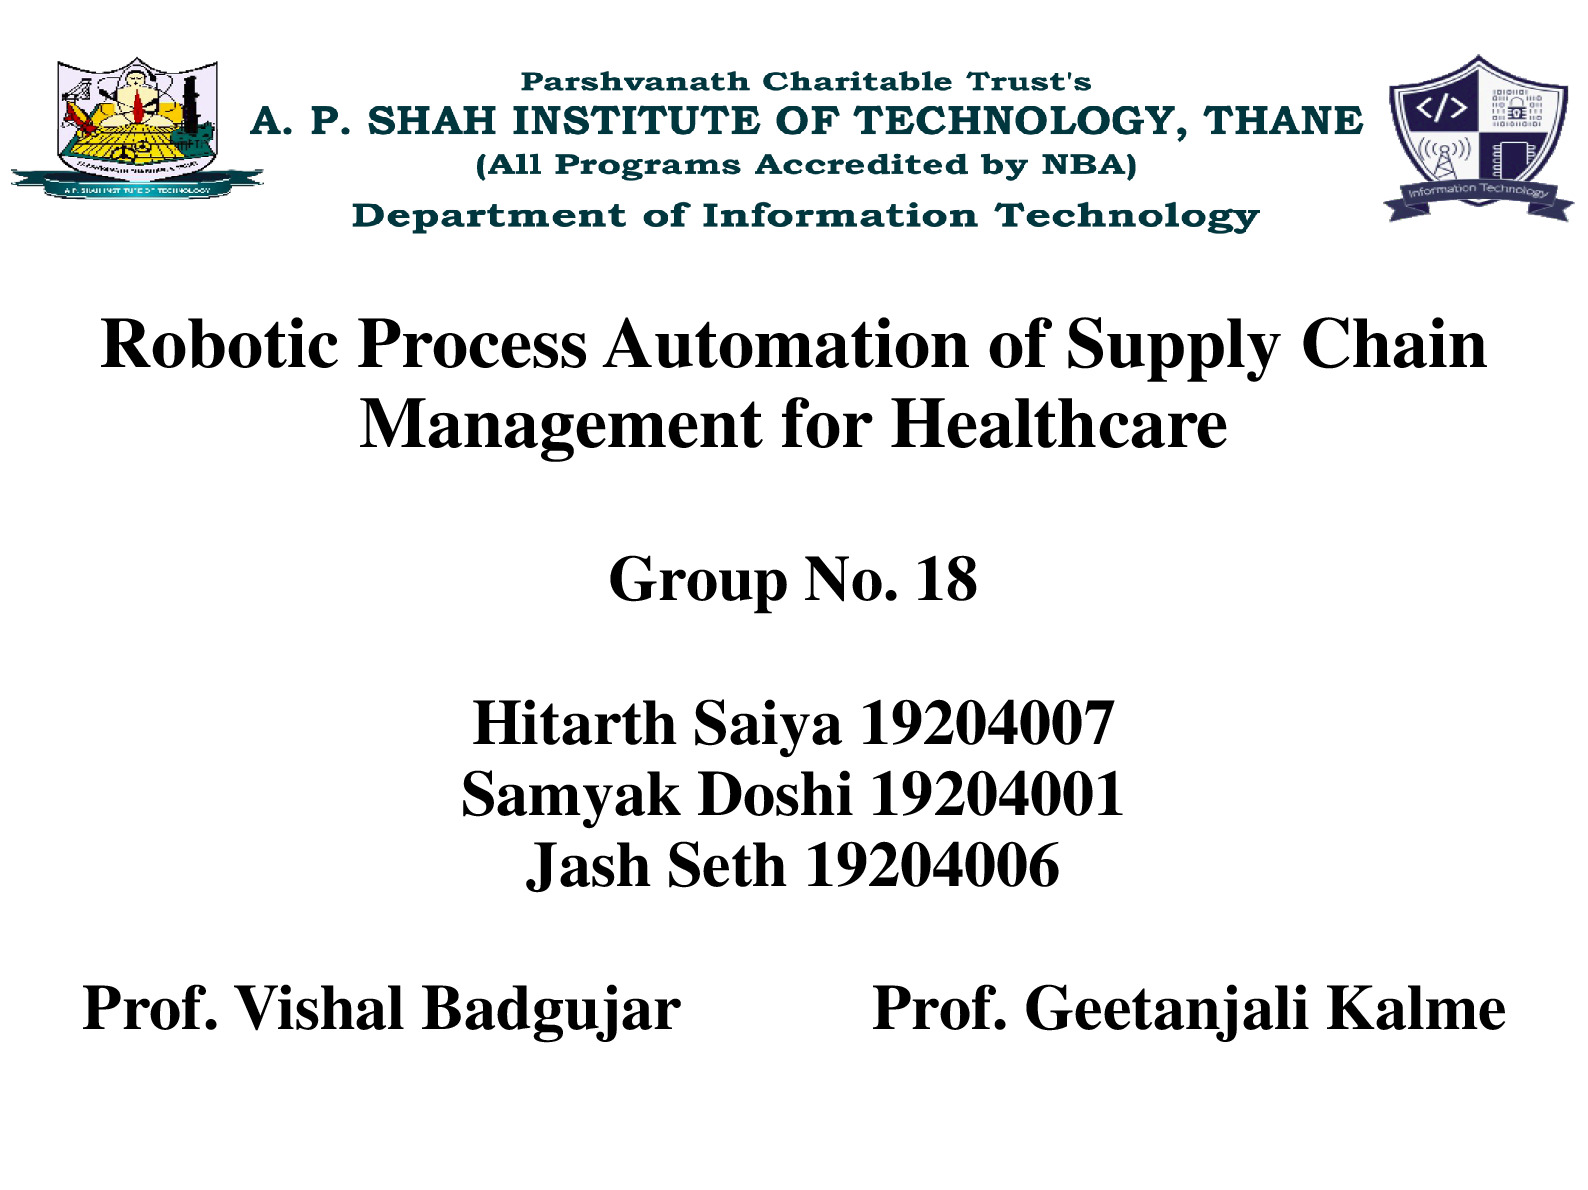 18_Robotic Process Automation of Supply Chain Management for Healthcare PPT1